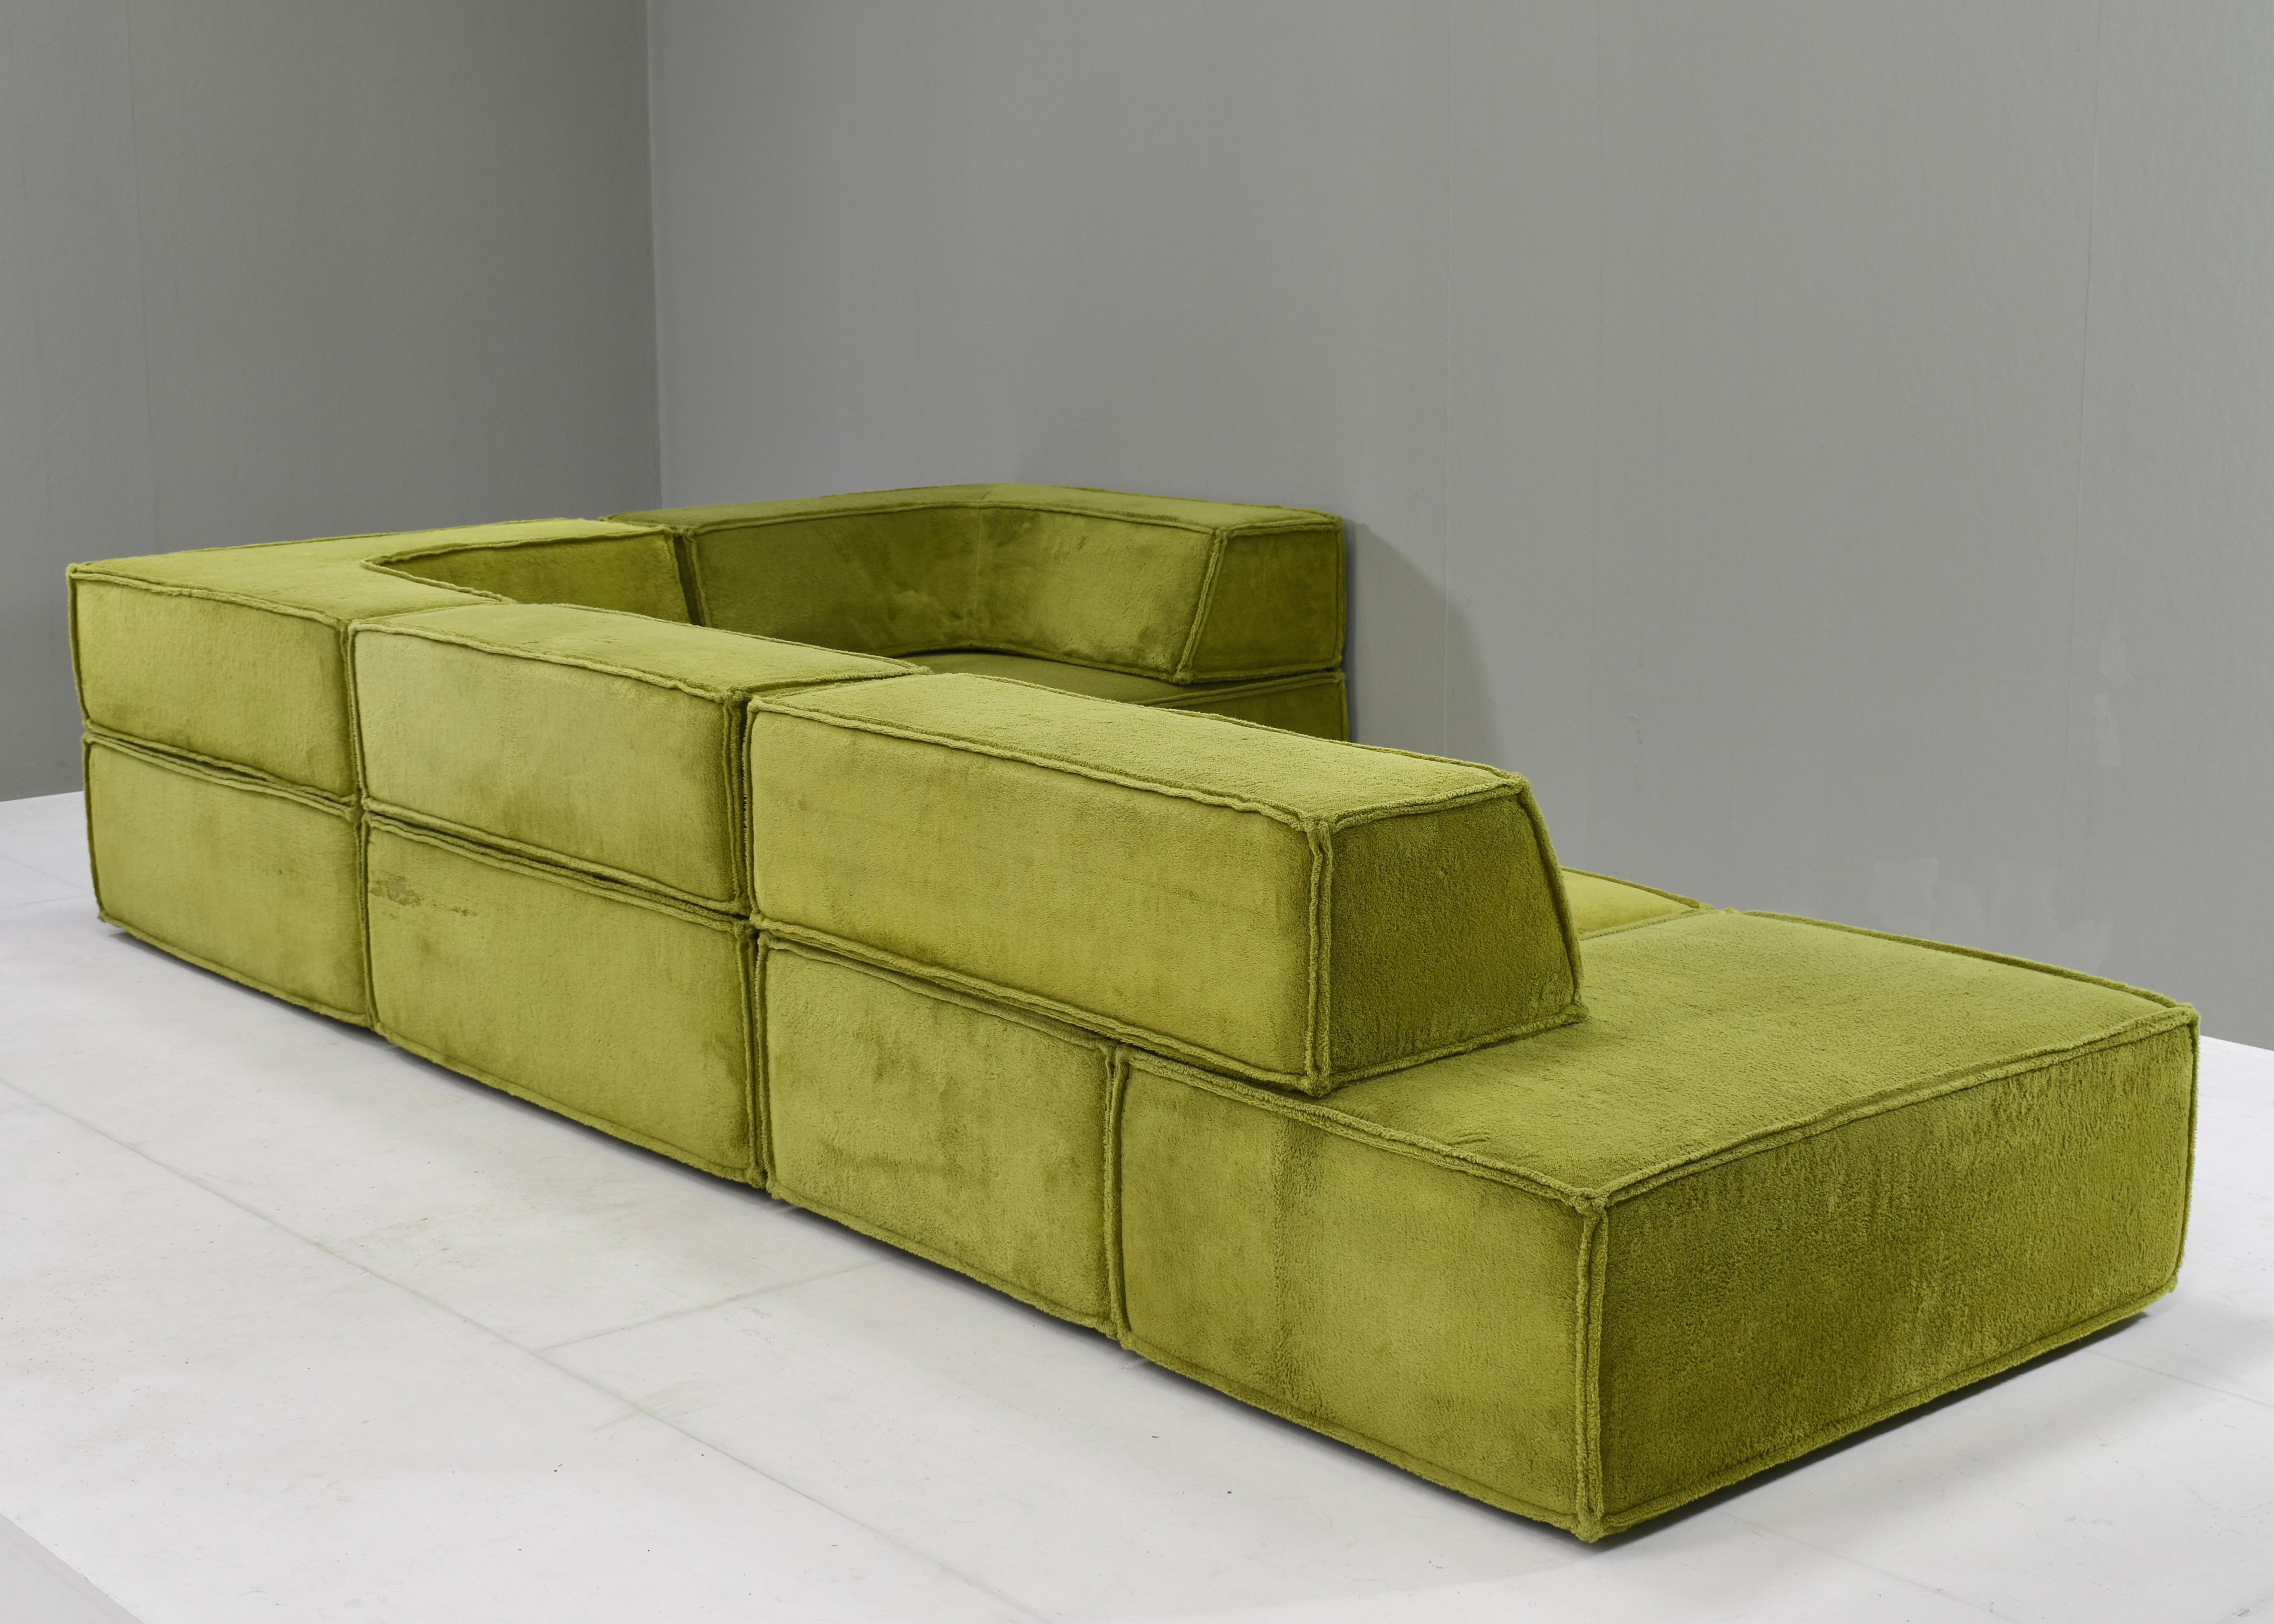 COR Trio Sectional Sofa by Team Form Ag for COR, Germany / Switzerland, 1972 4